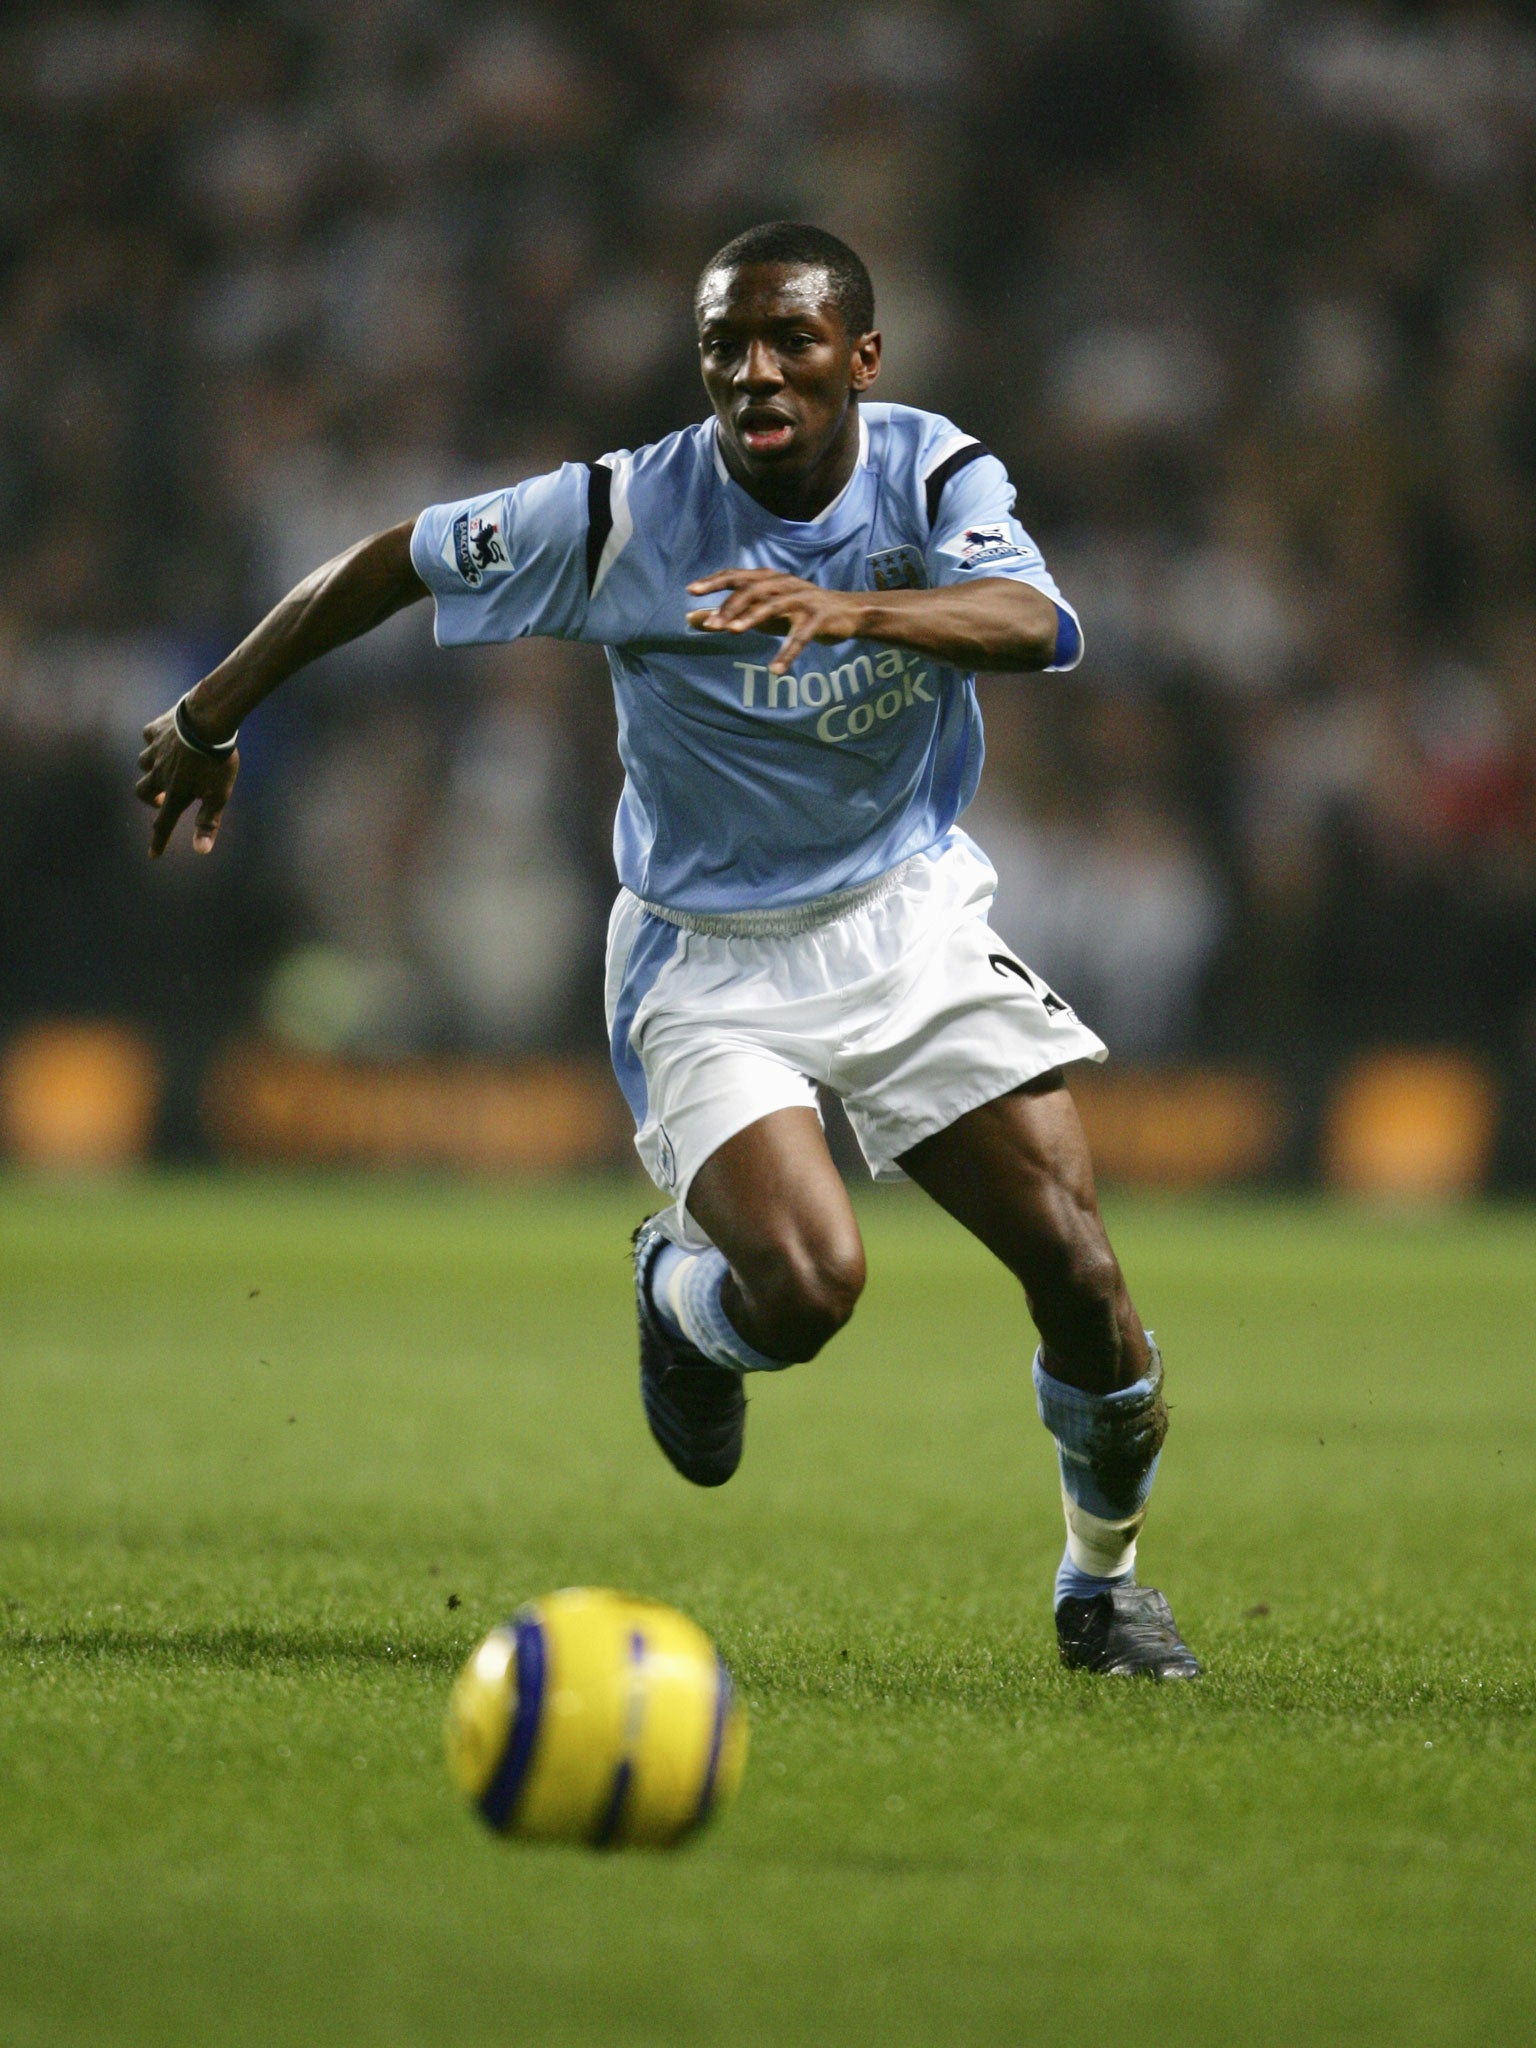 Shaun Wright-Phillips went to Chelsea when Manchester City received an offer they could not refuse. That won’t happen again as long as City’s Abu Dhabi funding lasts